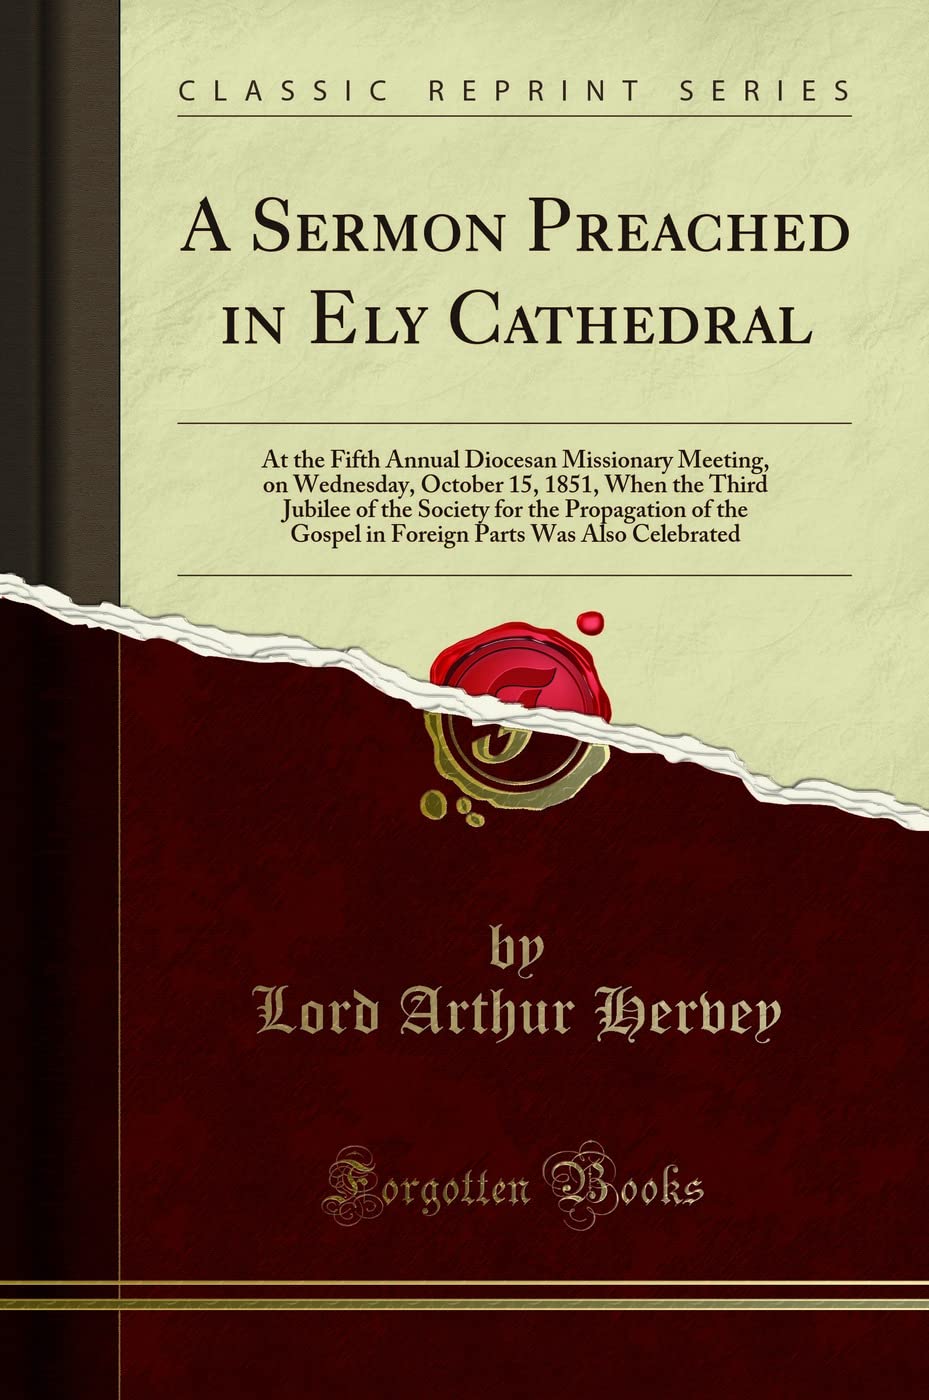 A Sermon Preached in Ely Cathedral